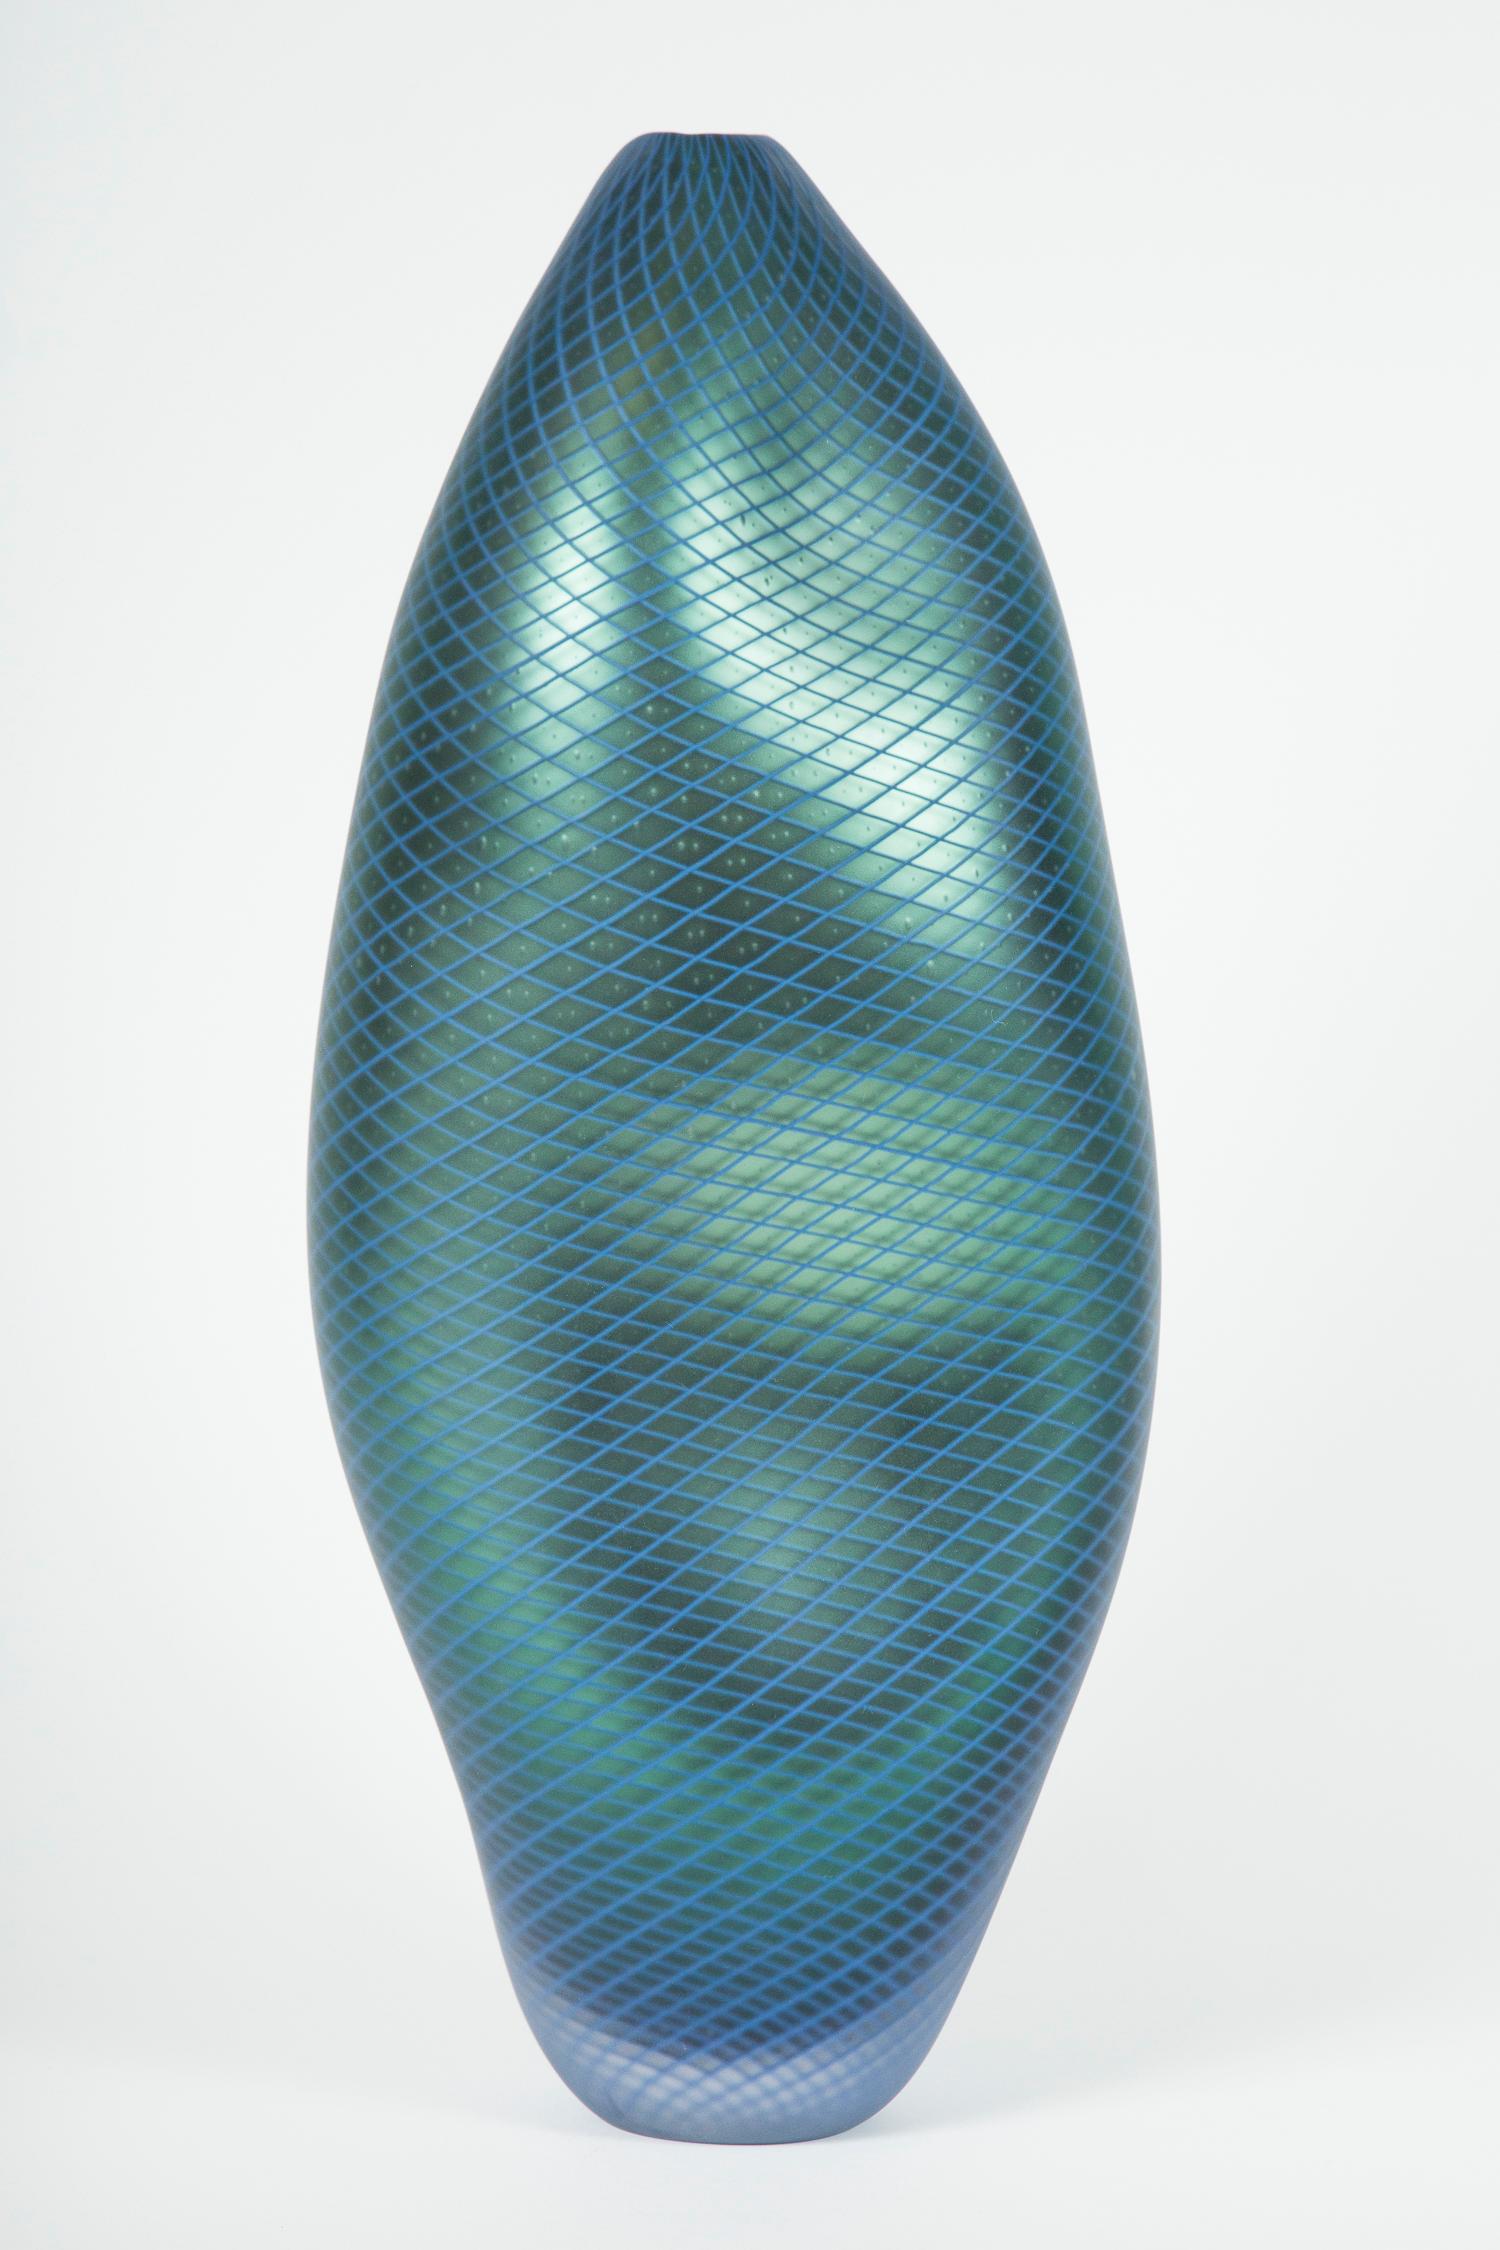 Stratiform Ferro Reticello 001 is a unique handblown glass vessel with fine filigree cane detail created by the British artist Liam Reeves. Handblown in teal and blue coloured glass, the interior has a mirrored finish, which results in a beautiful